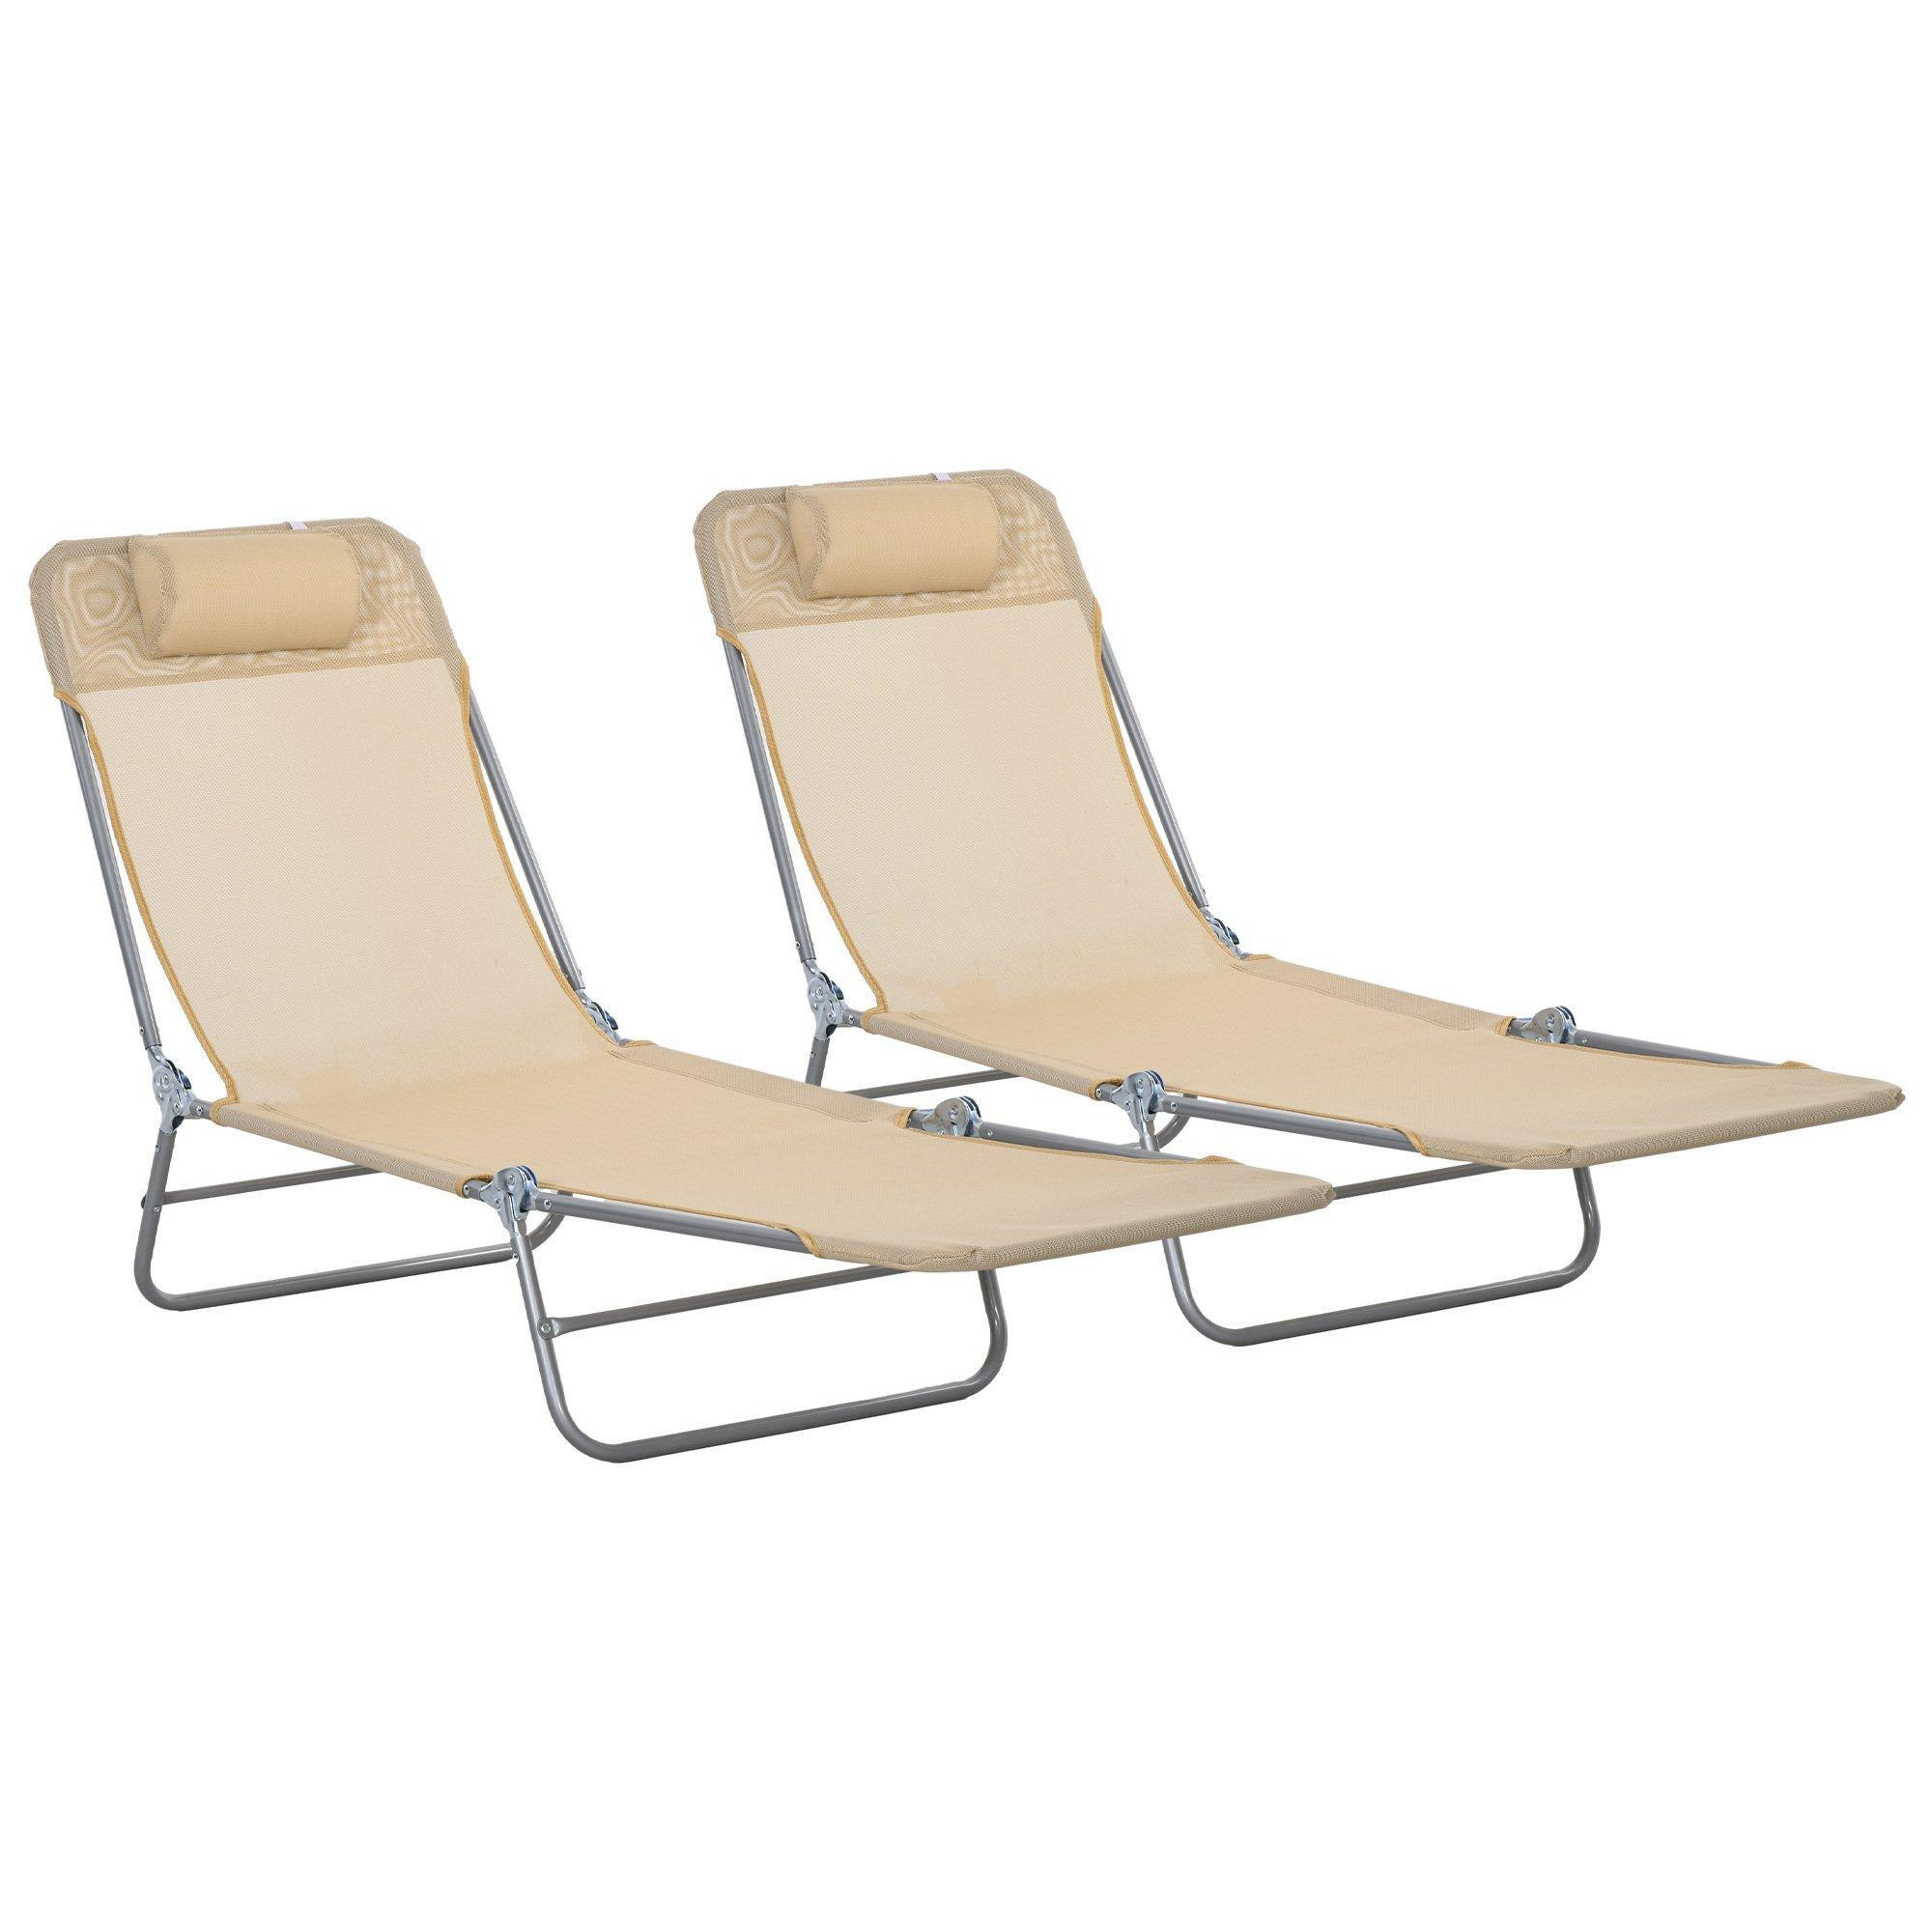 Outdoor Foldable Sun Loungers Set of 2 with 6 Level Adjustable Backrest Brown - image 1